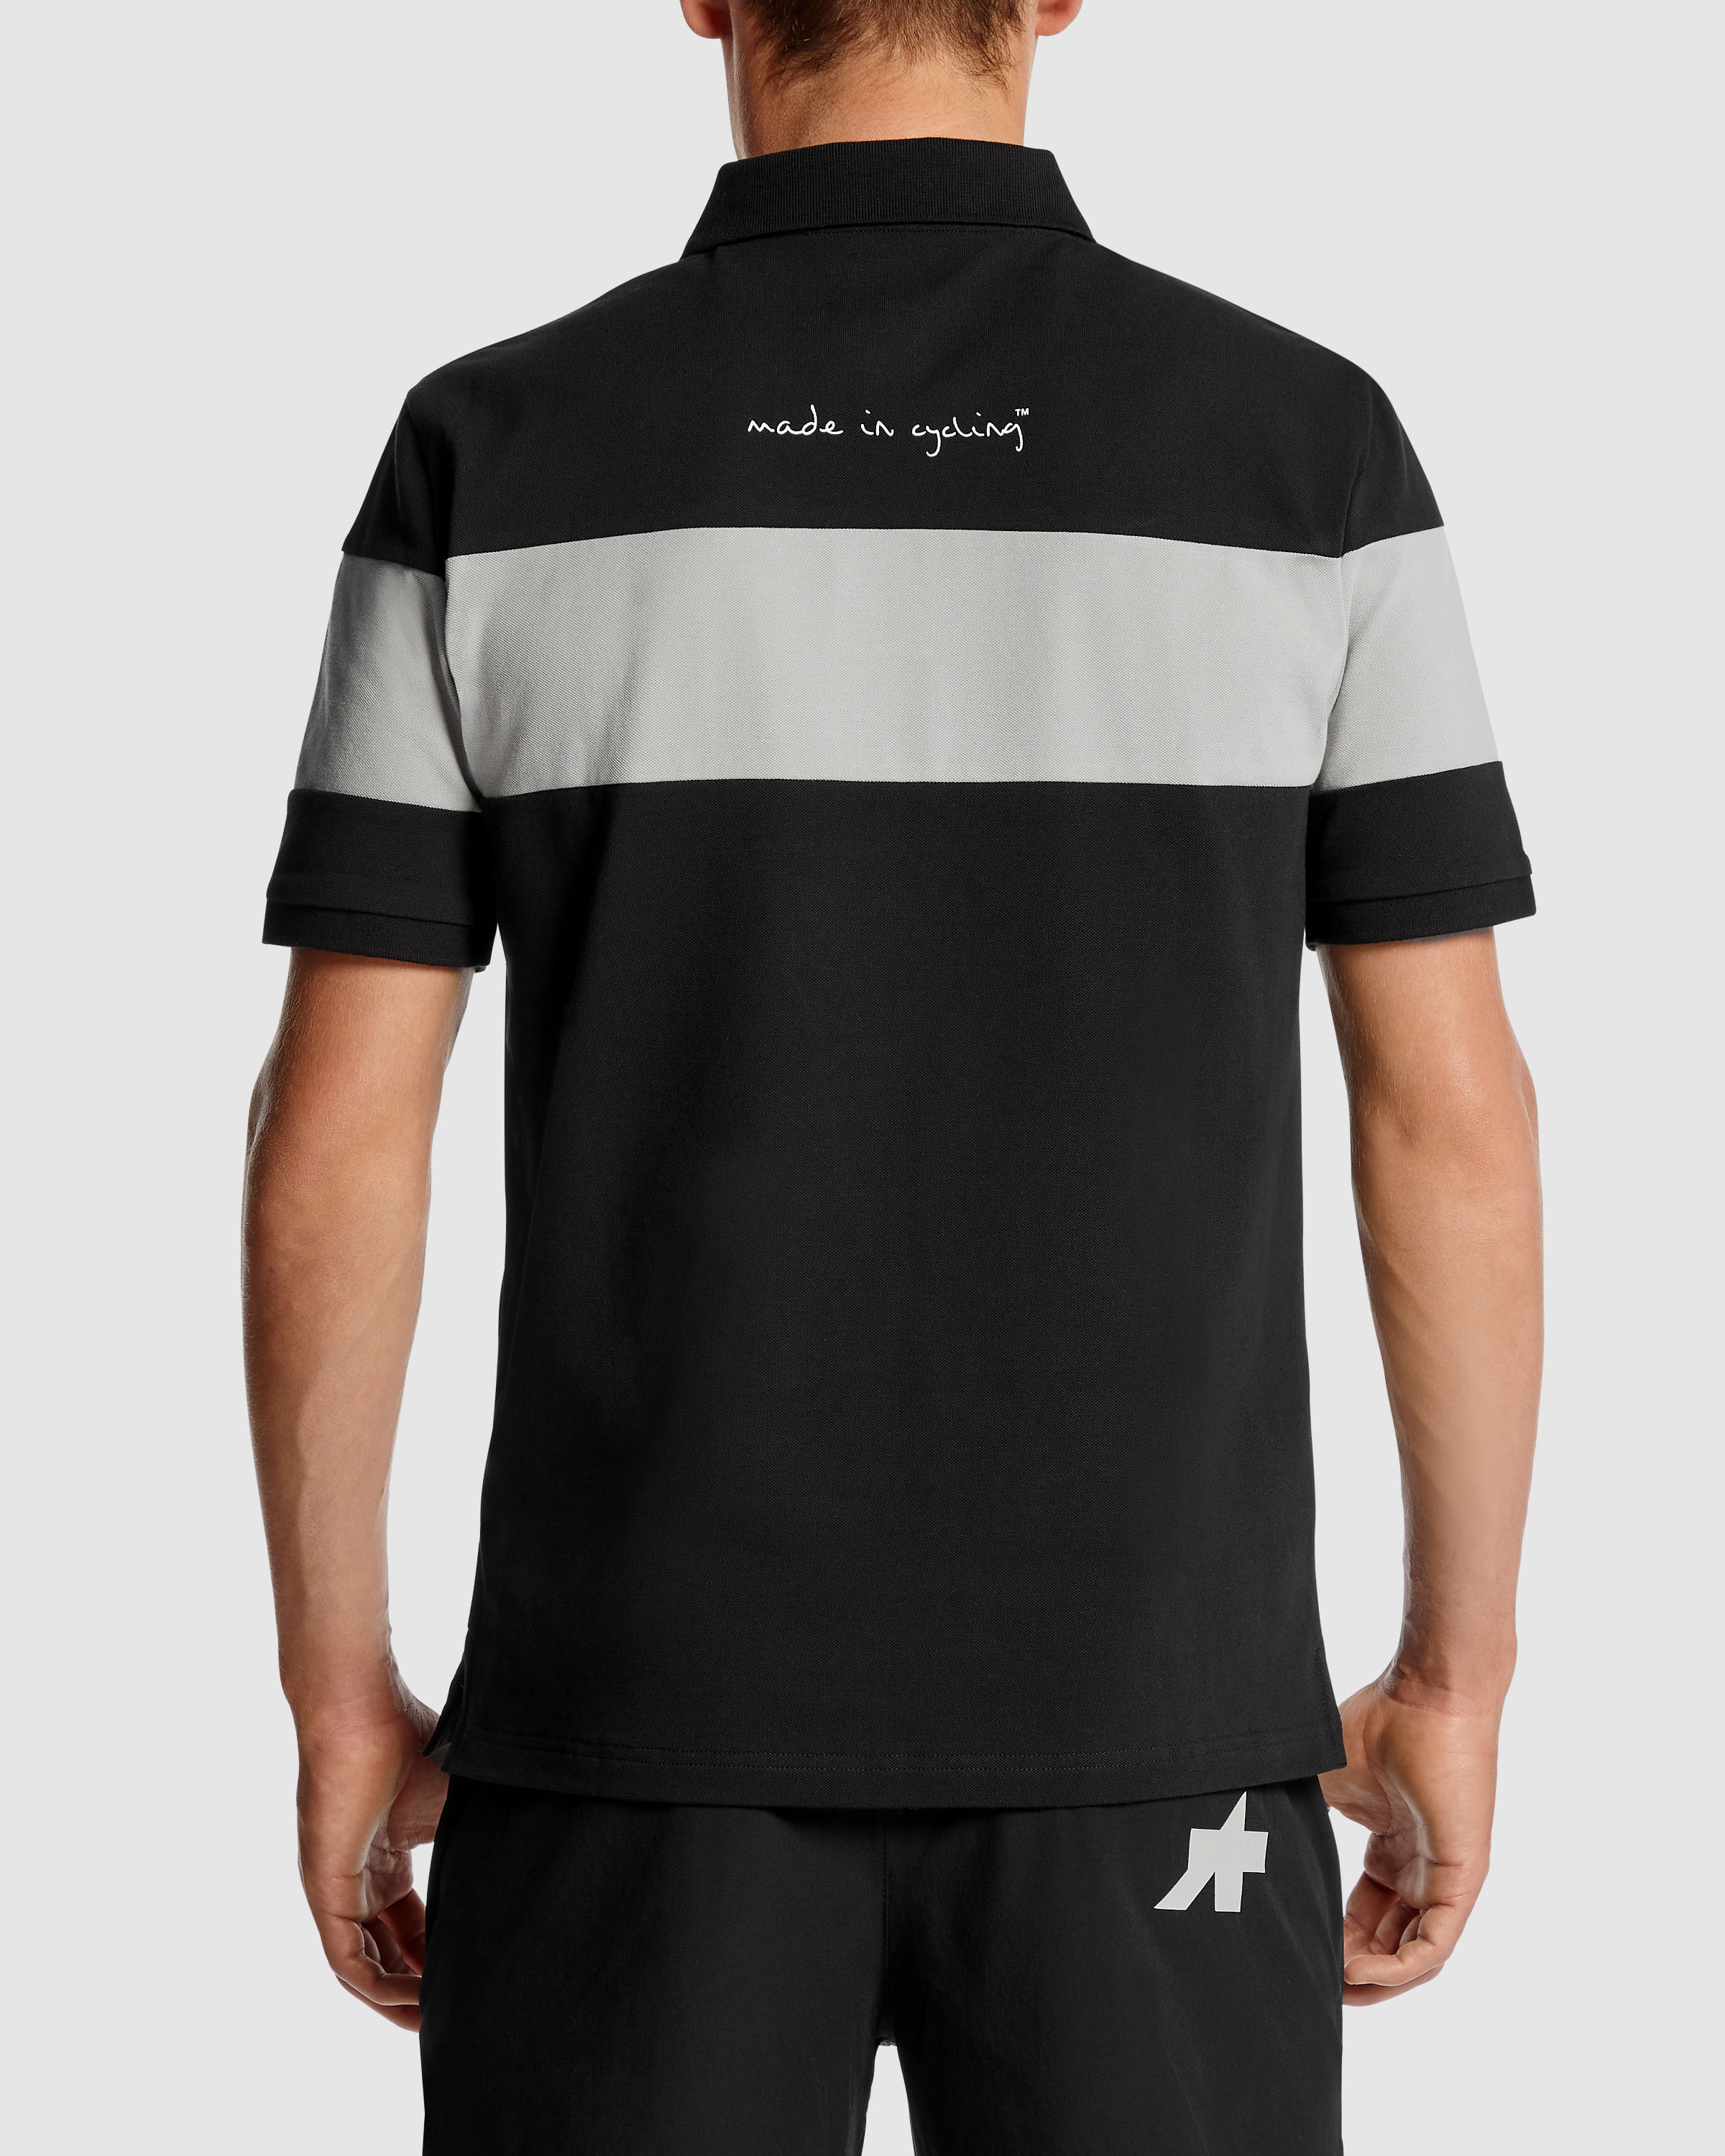 SIGNATURE Polo - ASSOS Of Switzerland - Official Outlet